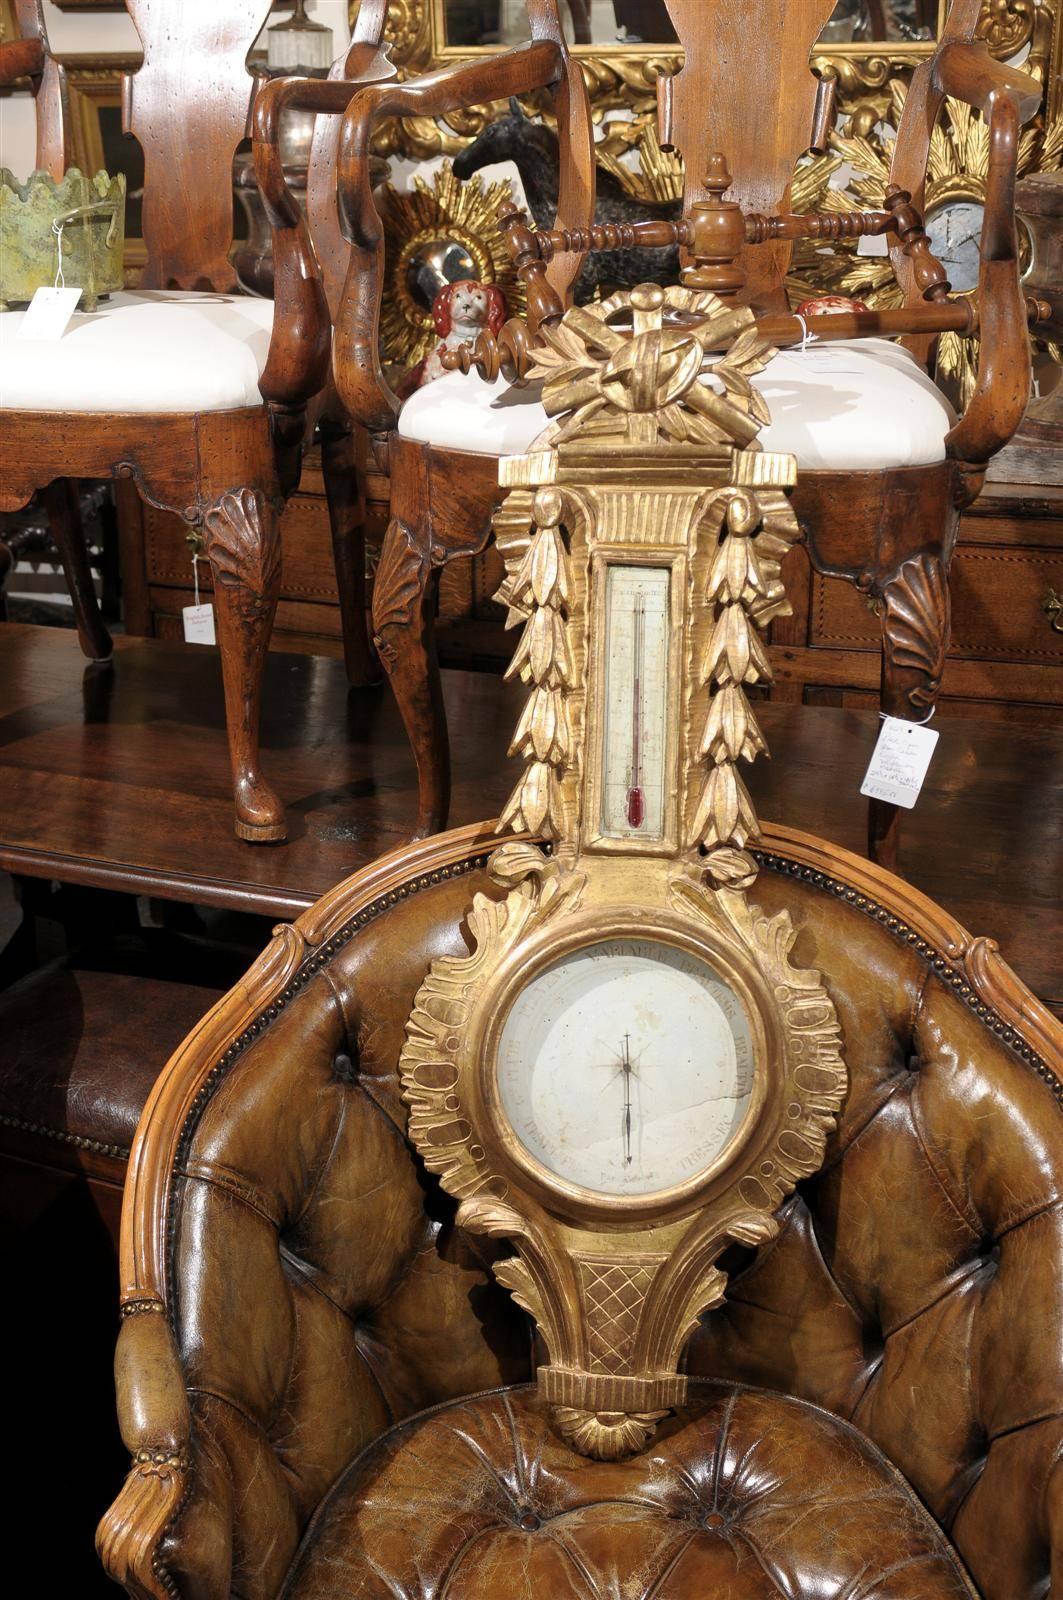 This exquisite French Louis XVI style mid 19th century giltwood barometer features a carved crest with quiver and foliage motif. In the lower section of the piece sits the barometer, nicely decorated with carved foliage in the surround while the